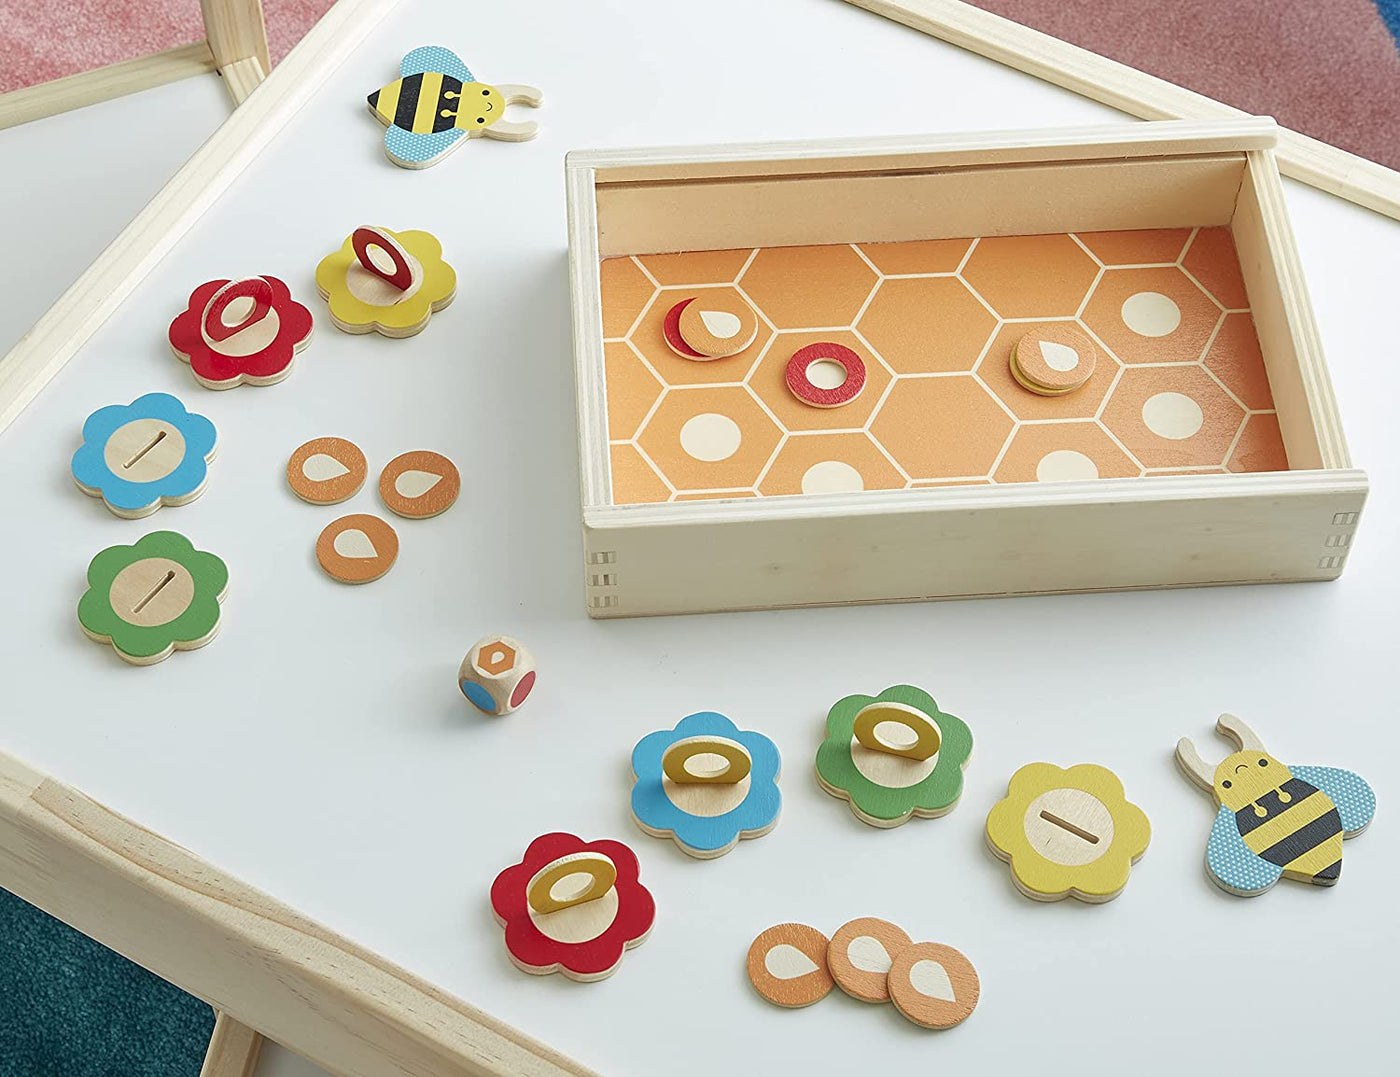 Sale Petit Collage Save the Bees Wooden Game